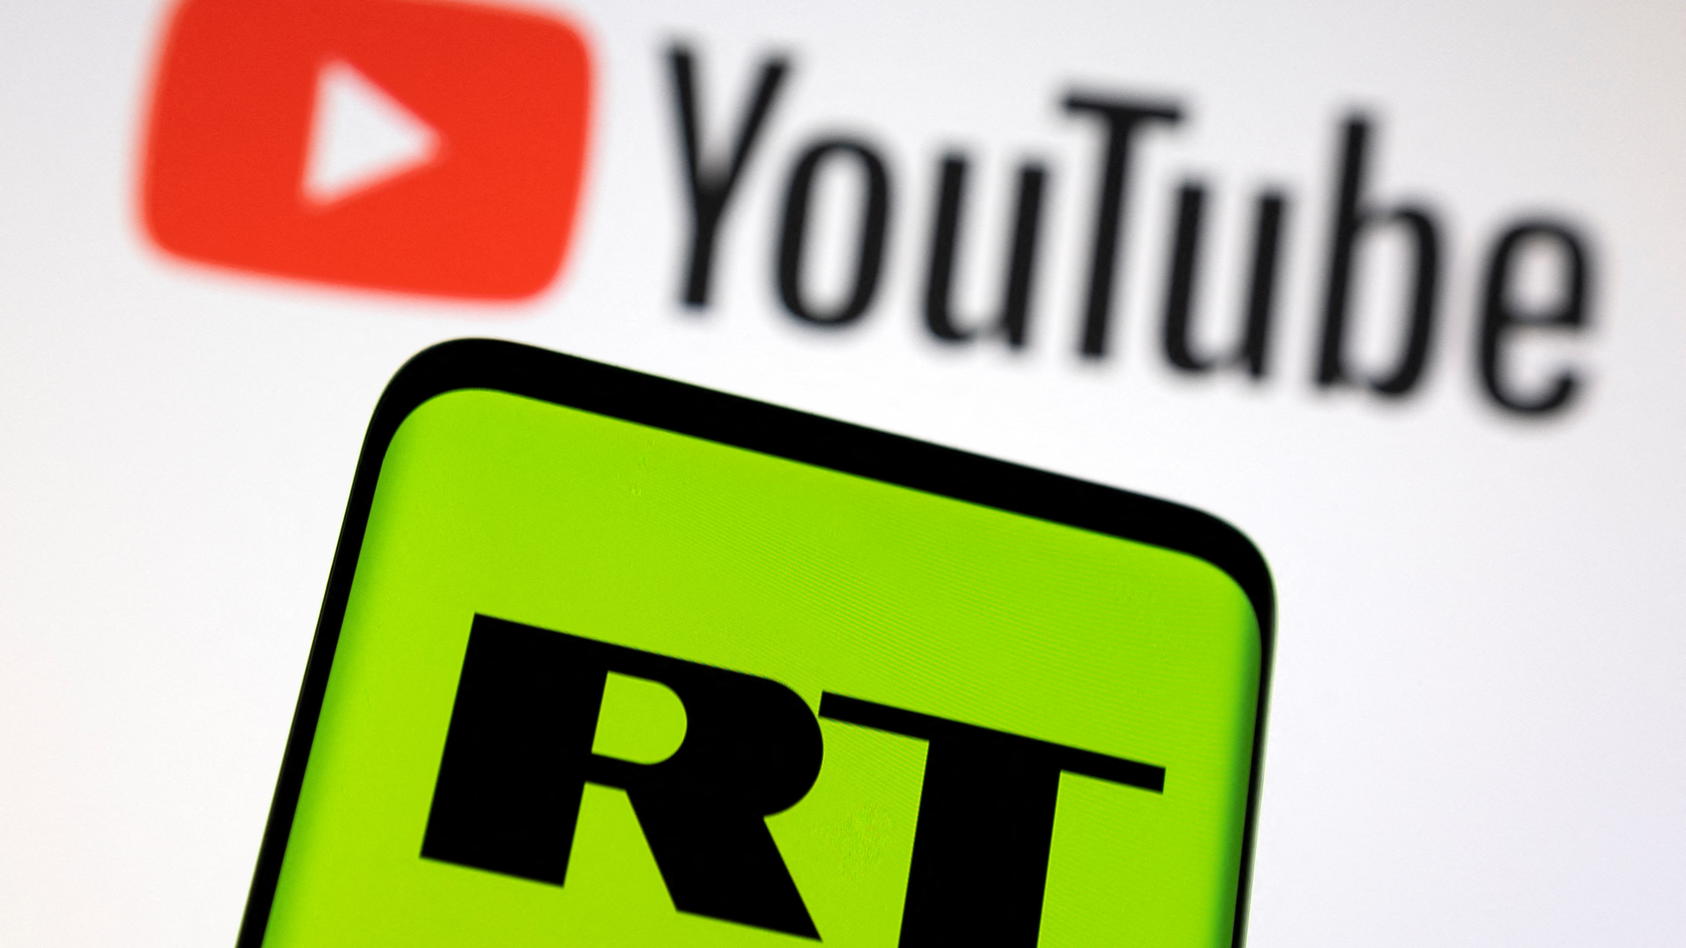 Russia Today (RT) logo is seen on a smartphone in front of displayed Youtube logo in this illustration picture taken February 26, 2022. REUTERS/Dado Ruvic/Illustration